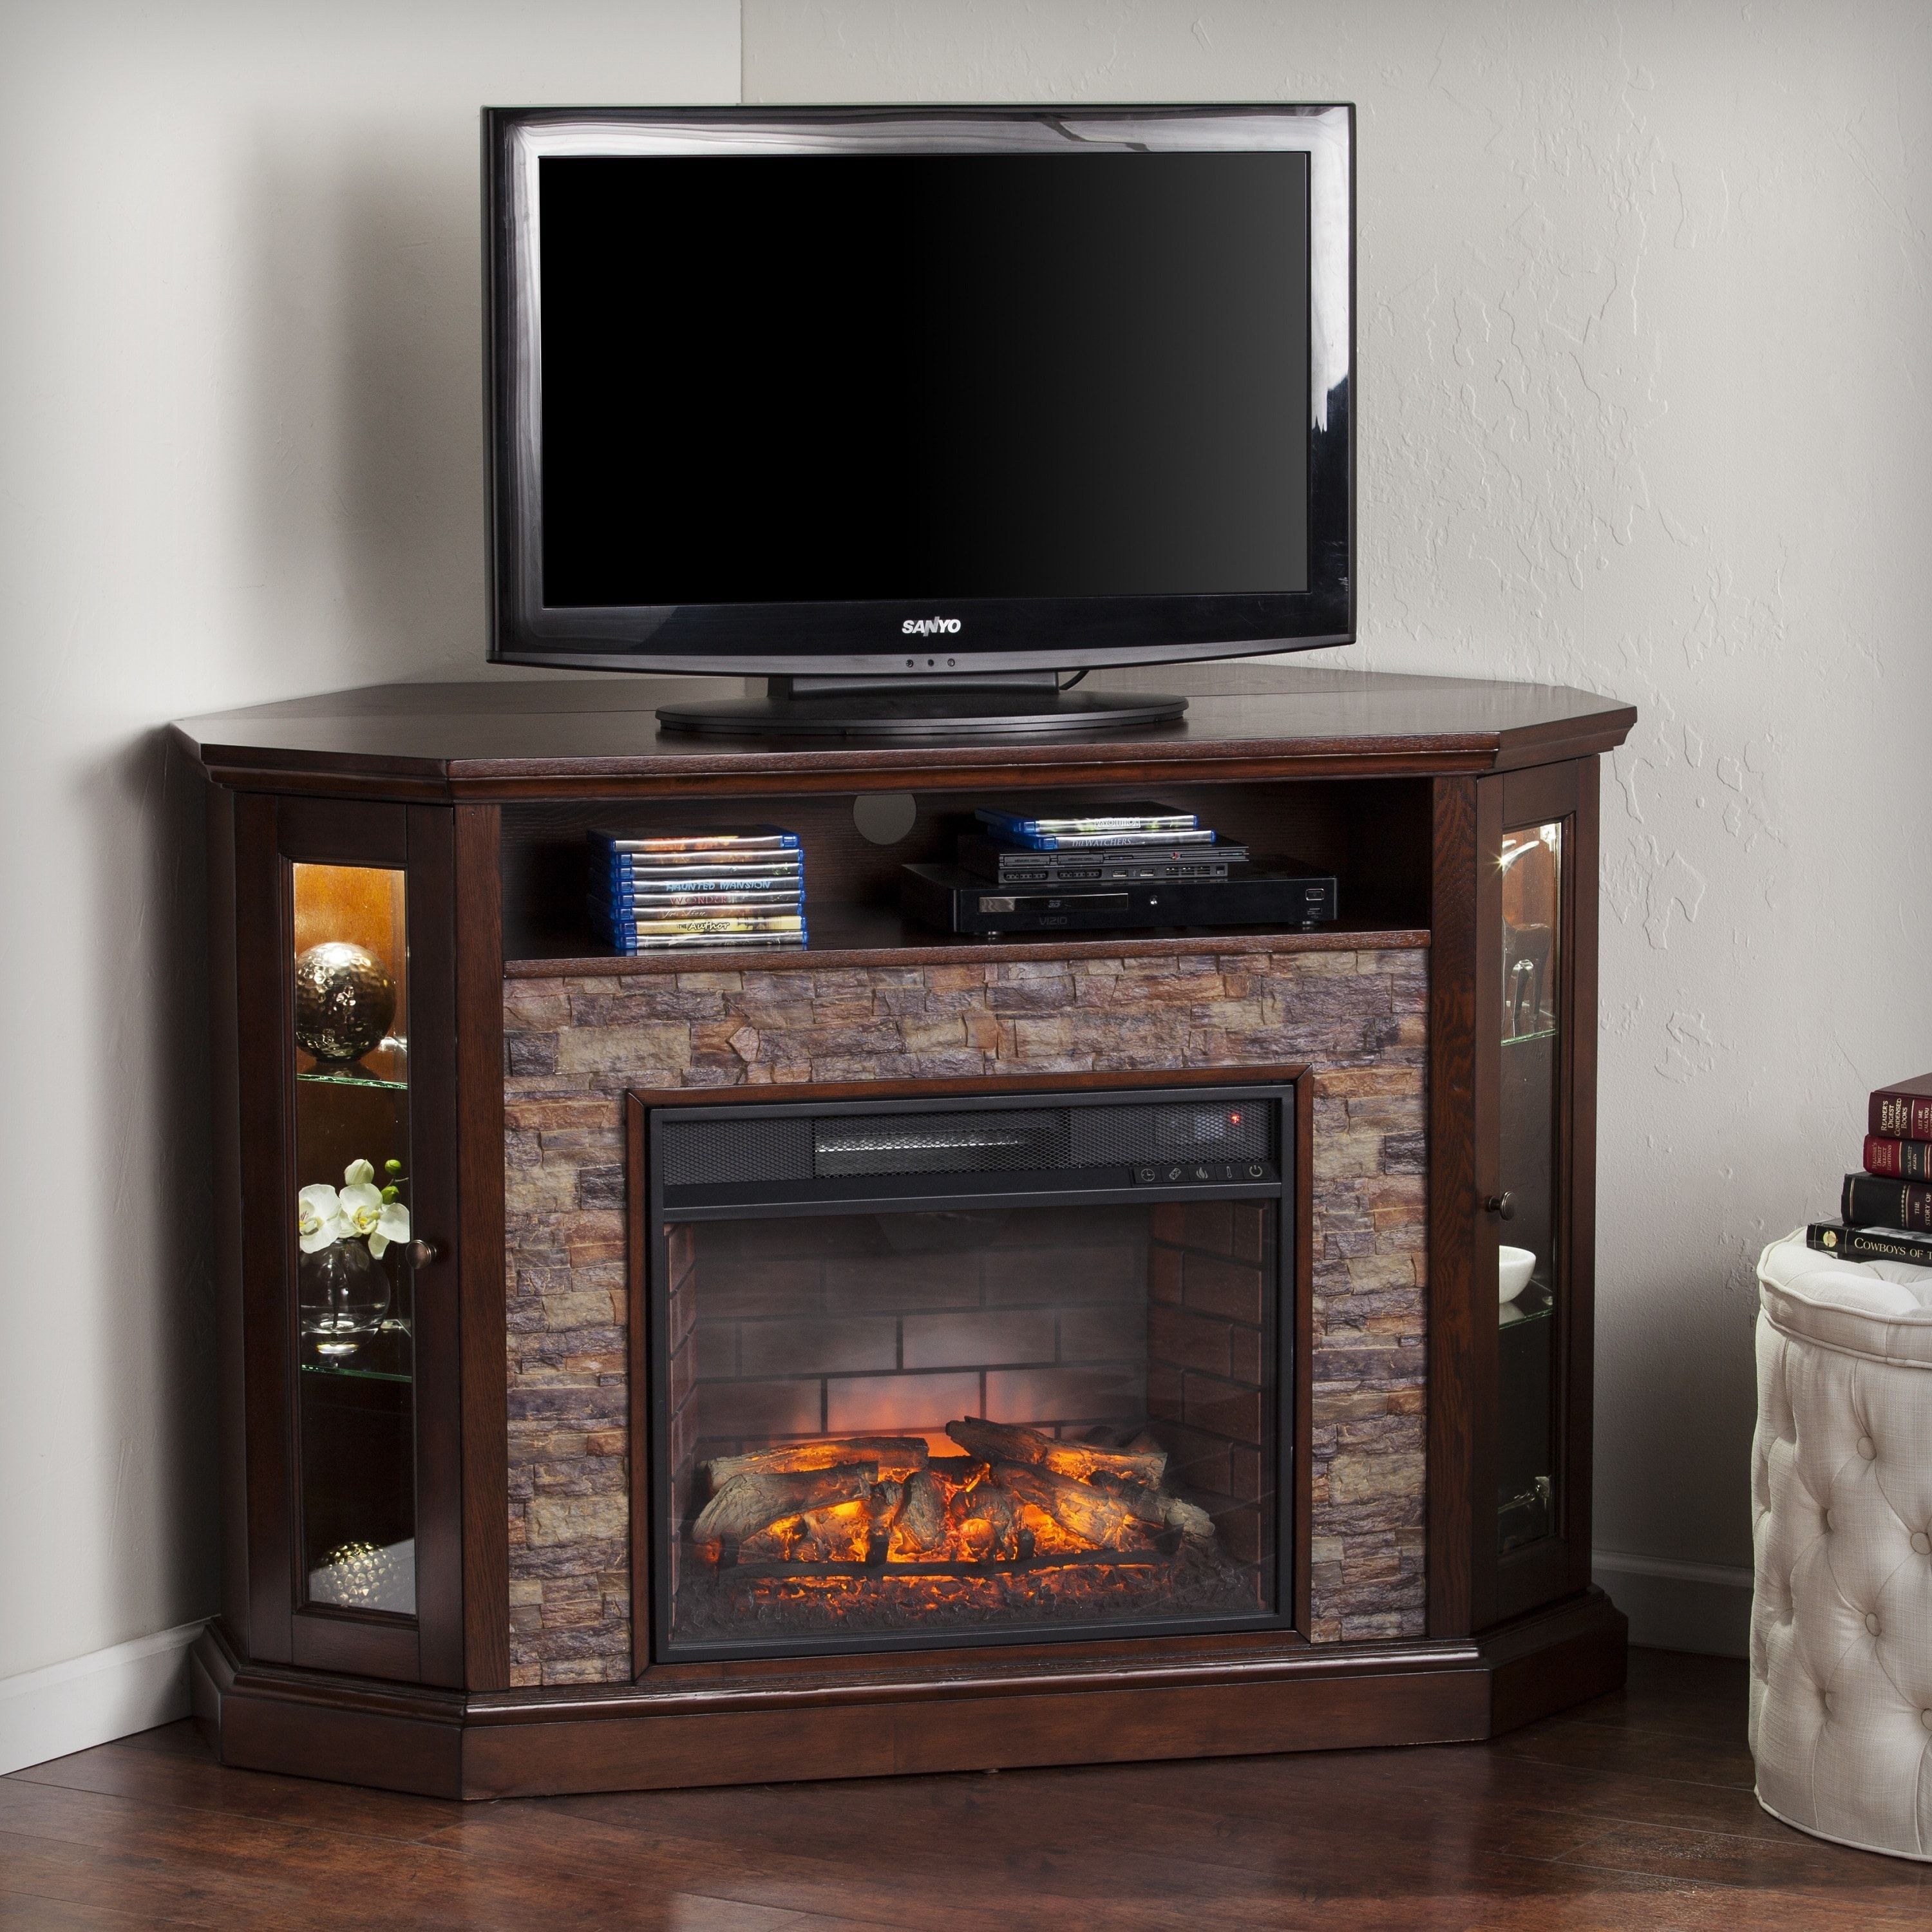 Infrared Electric Fireplace Tv Stand Best Of Harper Blvd Ratner Faux Stone Corner Convertible Infrared